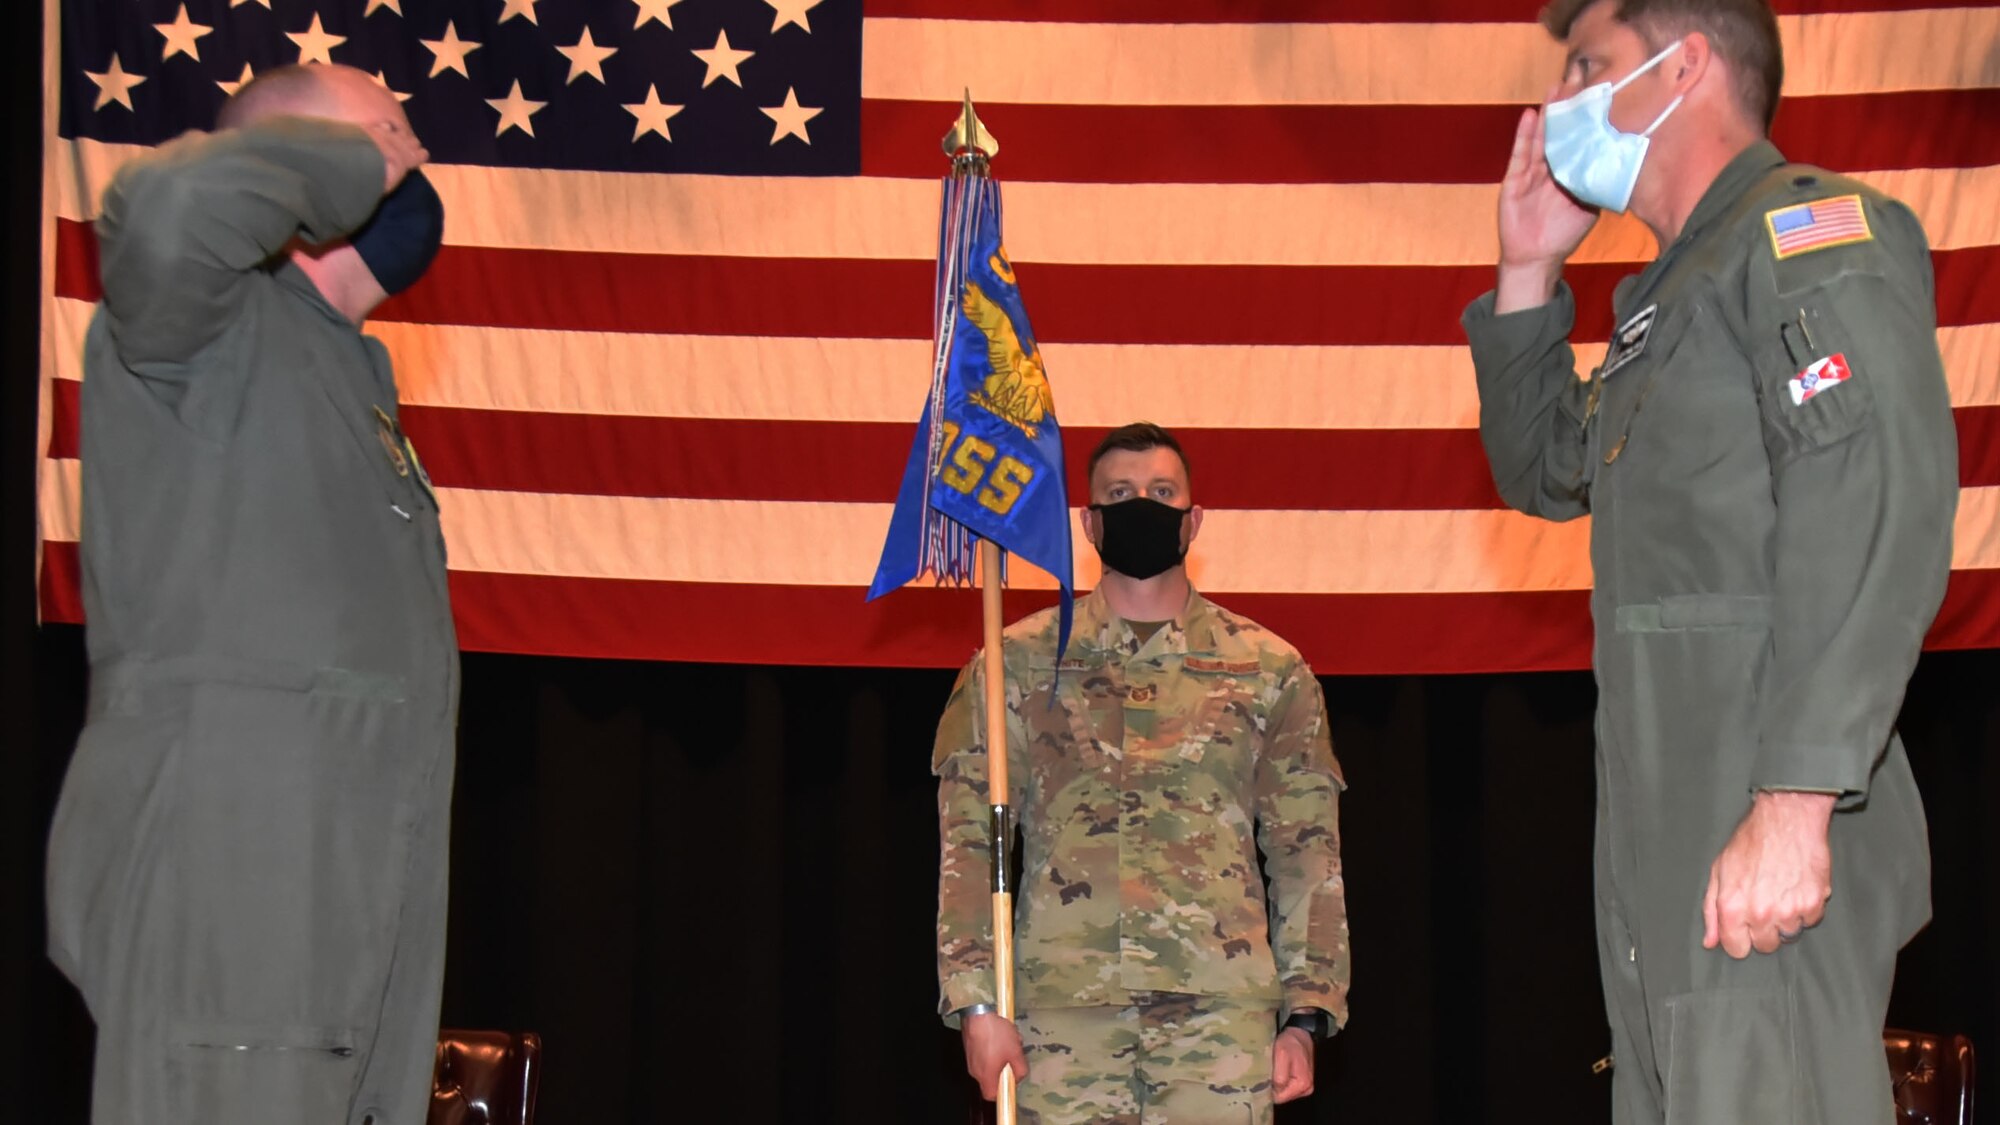 Lt. Col. Jason Helmick, right, assumes command of the 931st Operations Support Squadron during a change of command ceremony March 6, 2021, at McConnell Air Force Base, Kansas.